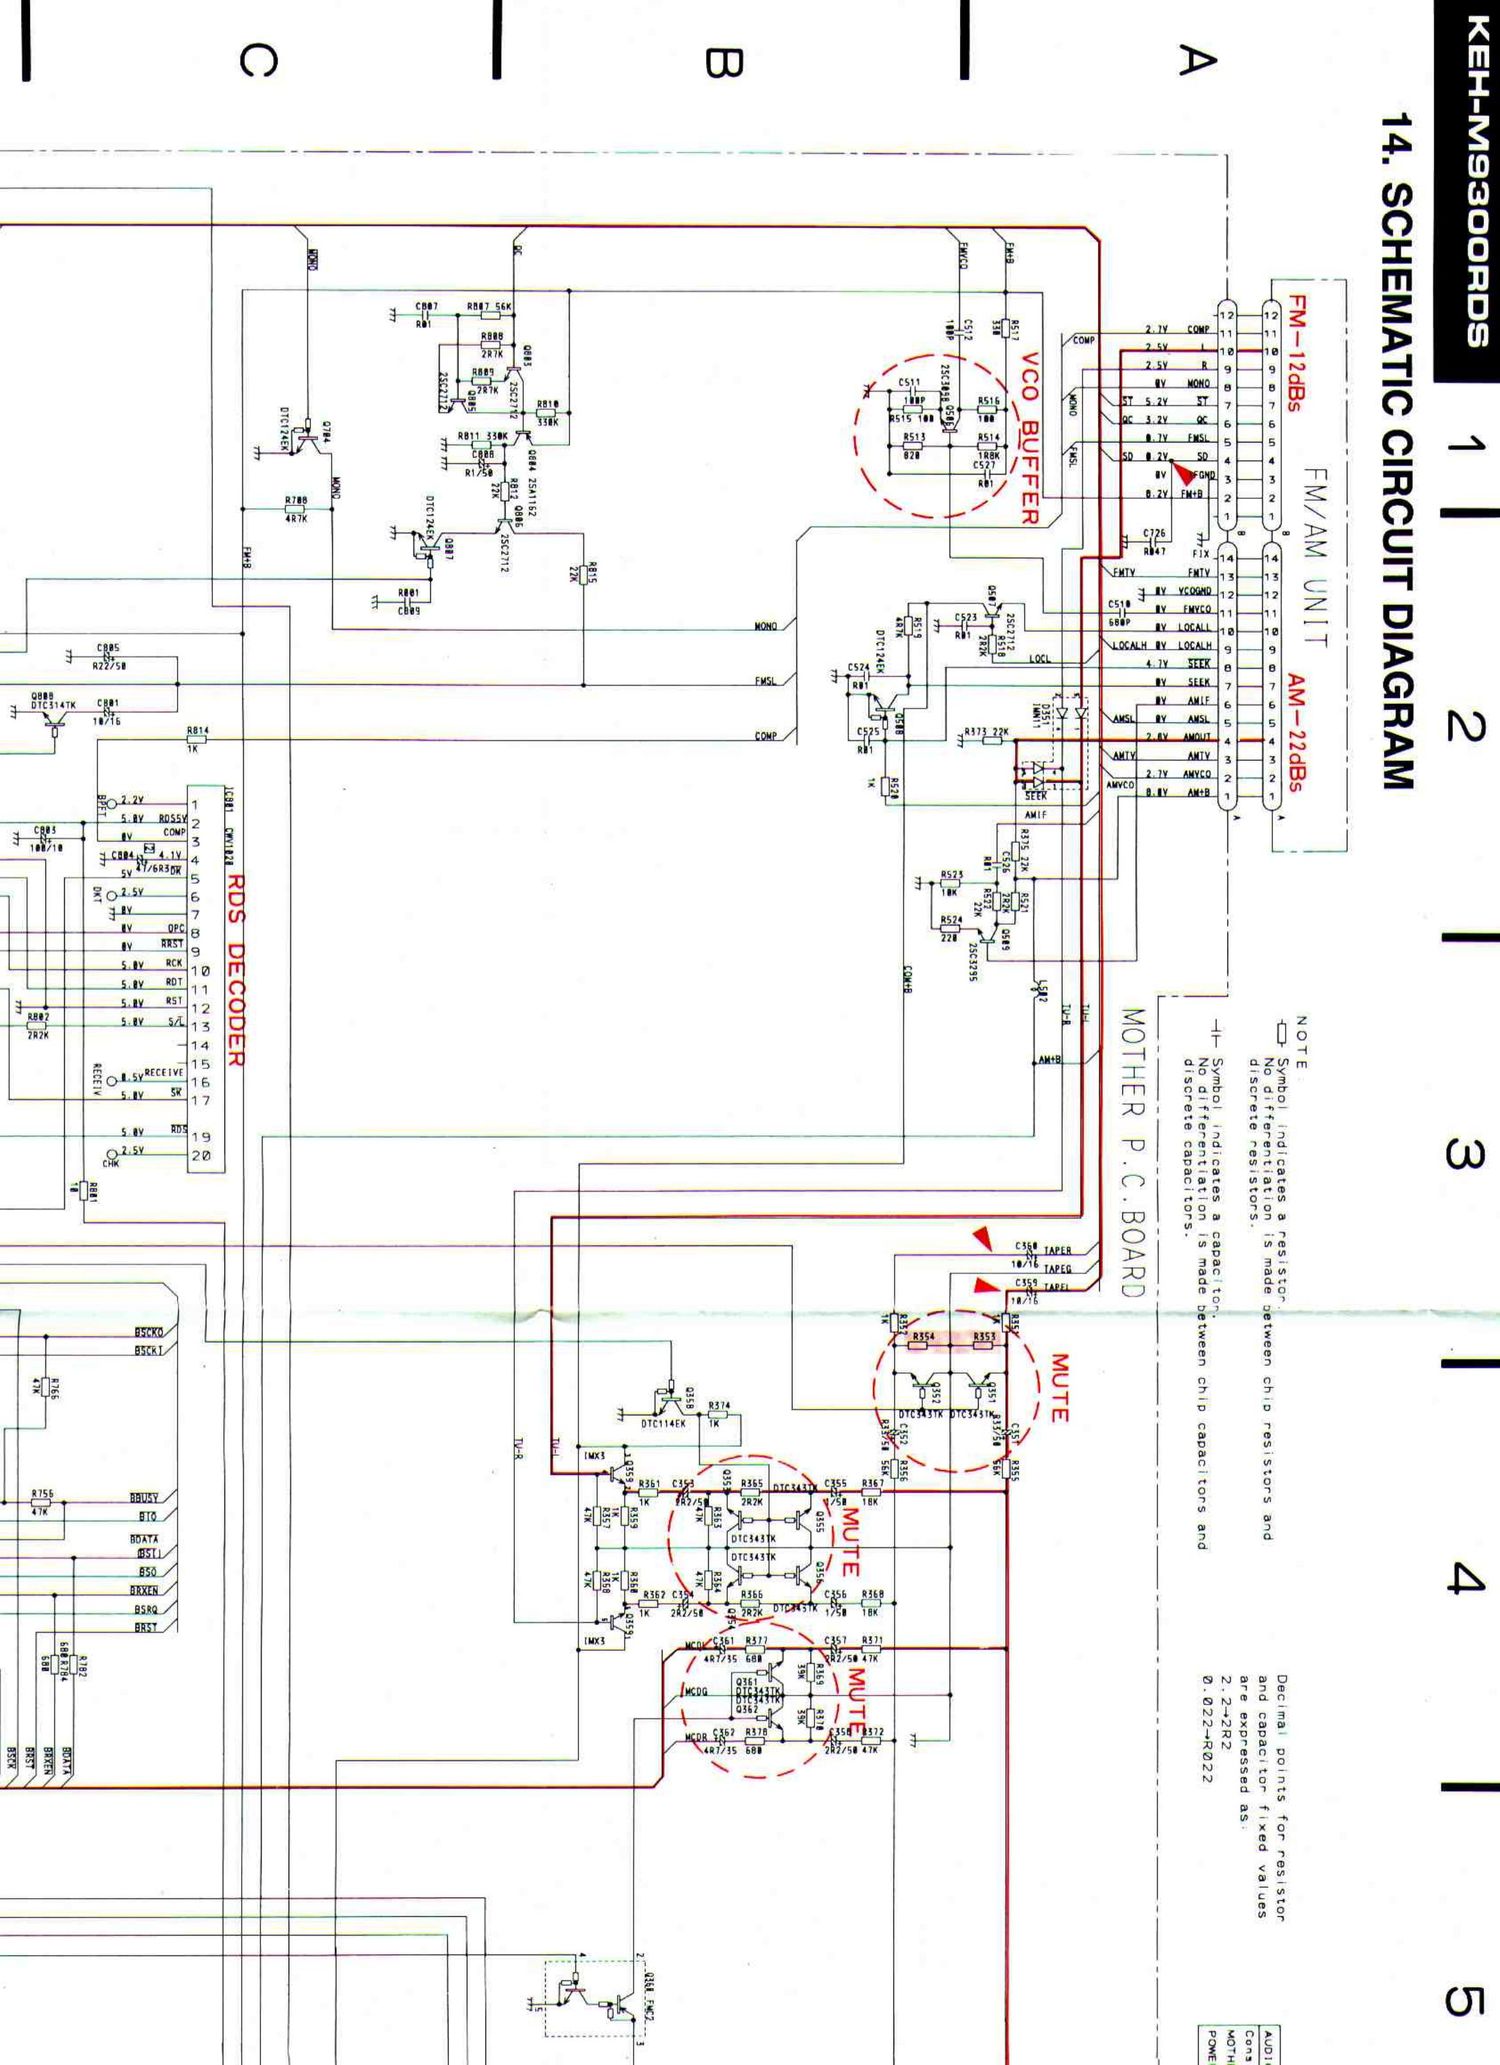 pioneer kehm 9300 rds schematic